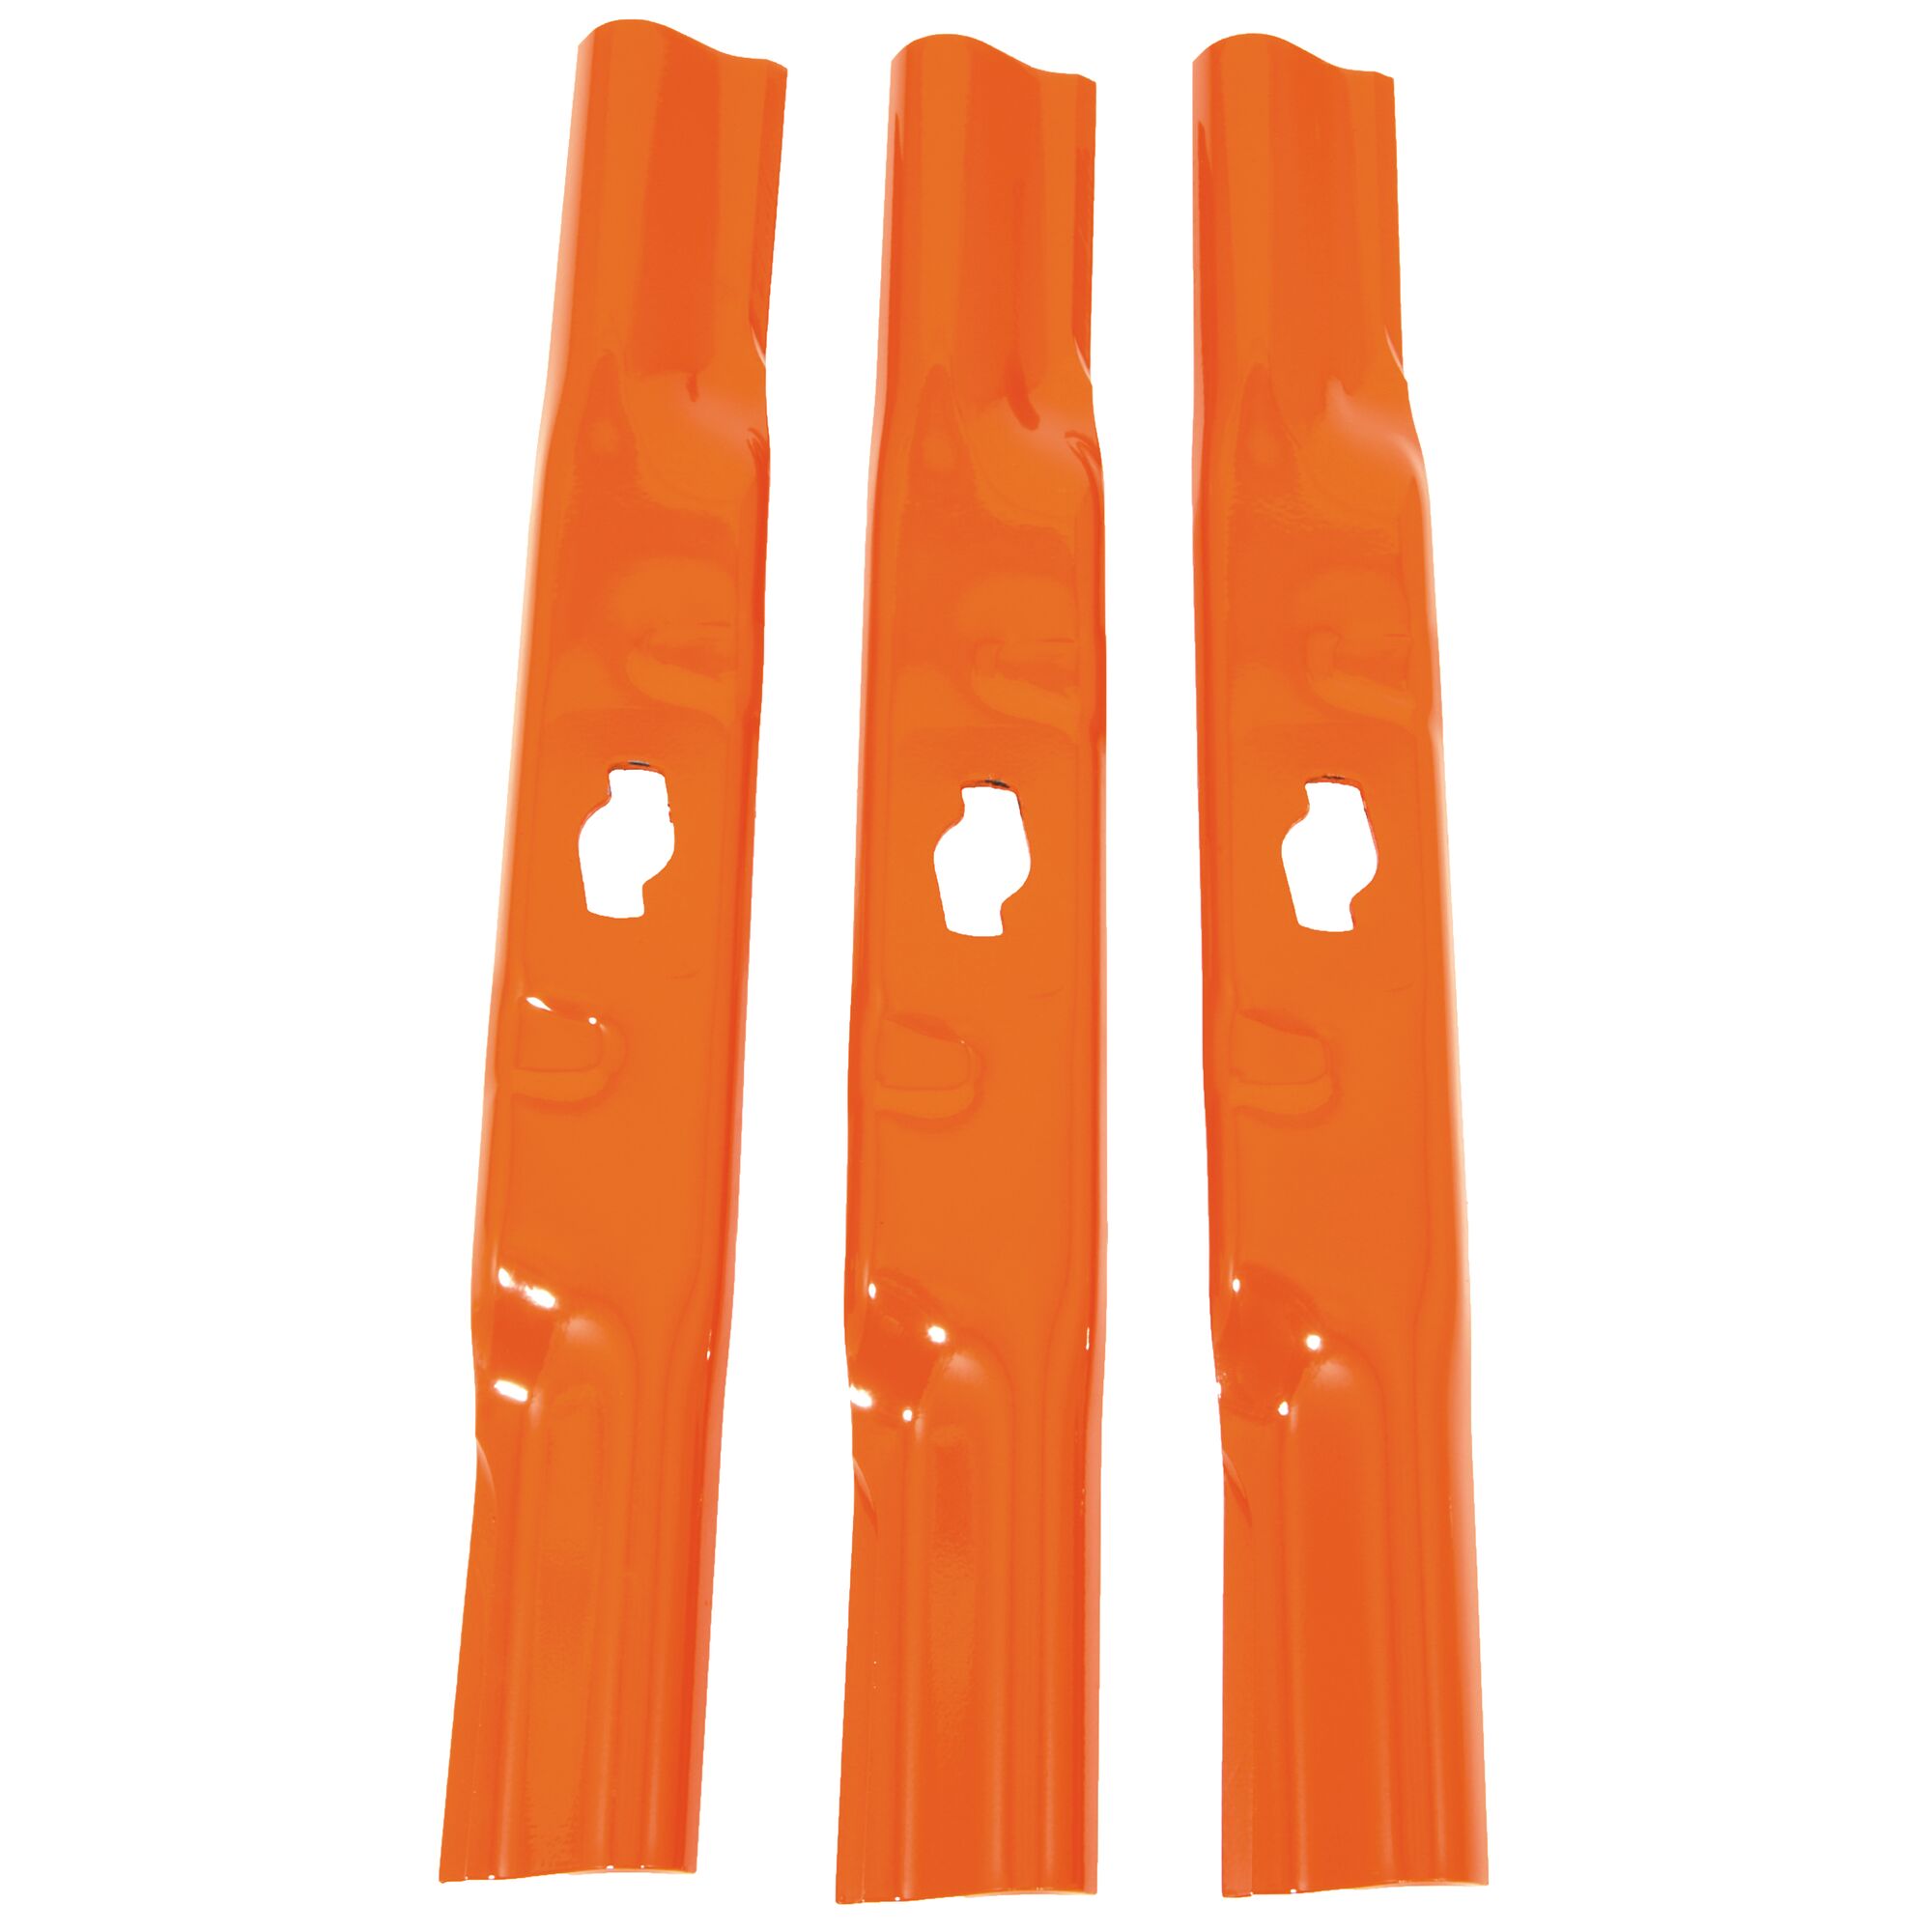 54 inch Low Lift Small S Blade Set of 3.